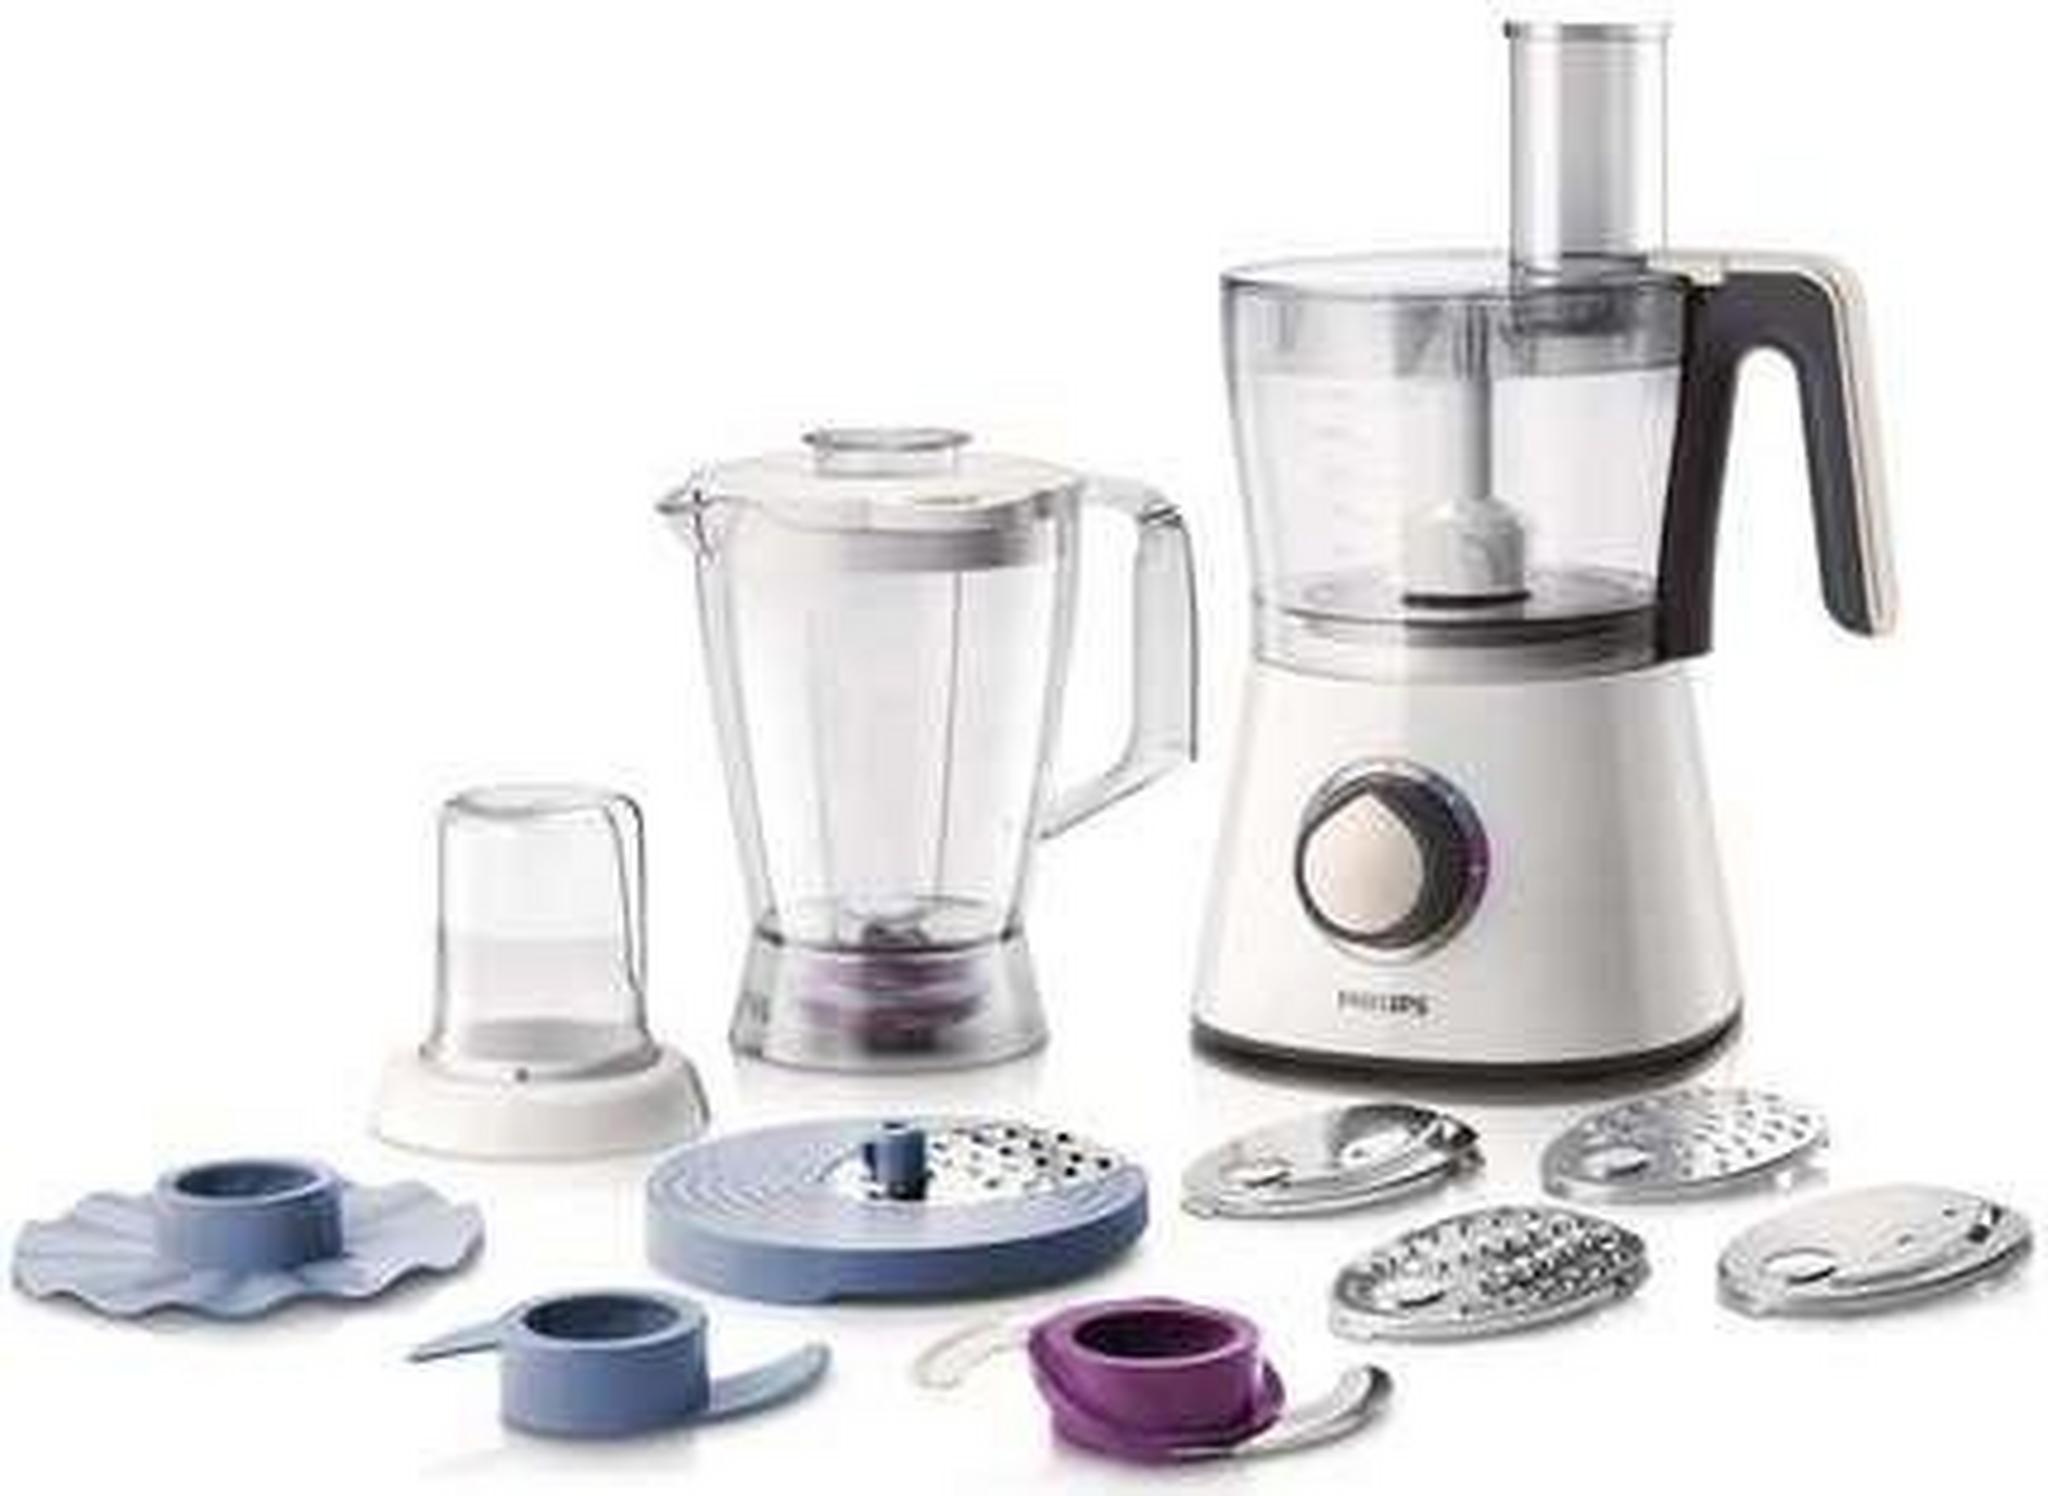 Philips Viva Collection Food Processor 750 Watt with compact 3-in1 setup HR7761/01 - White